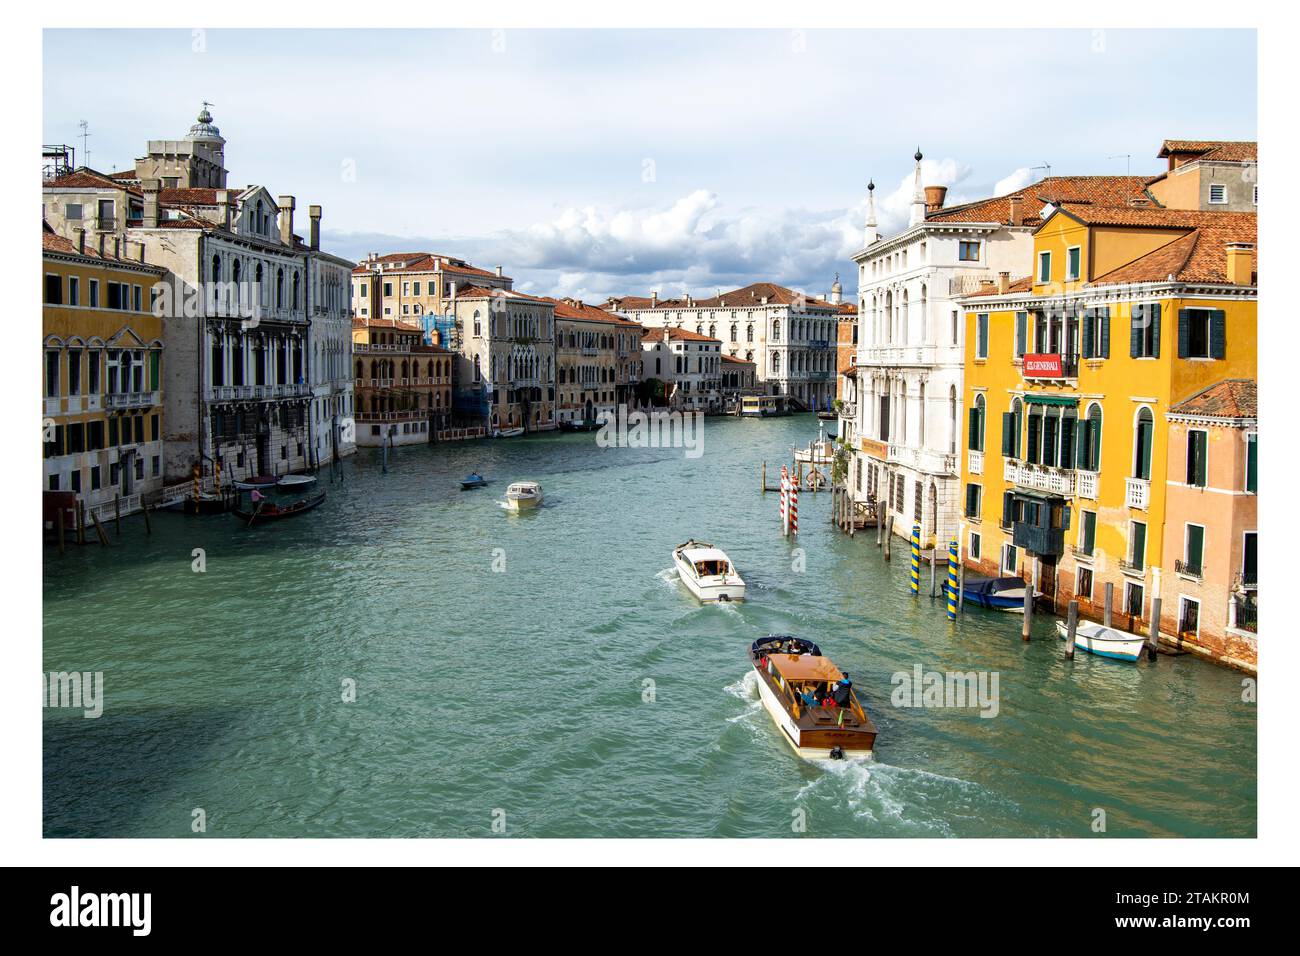 The Grand Canal, Venice Stock Photo